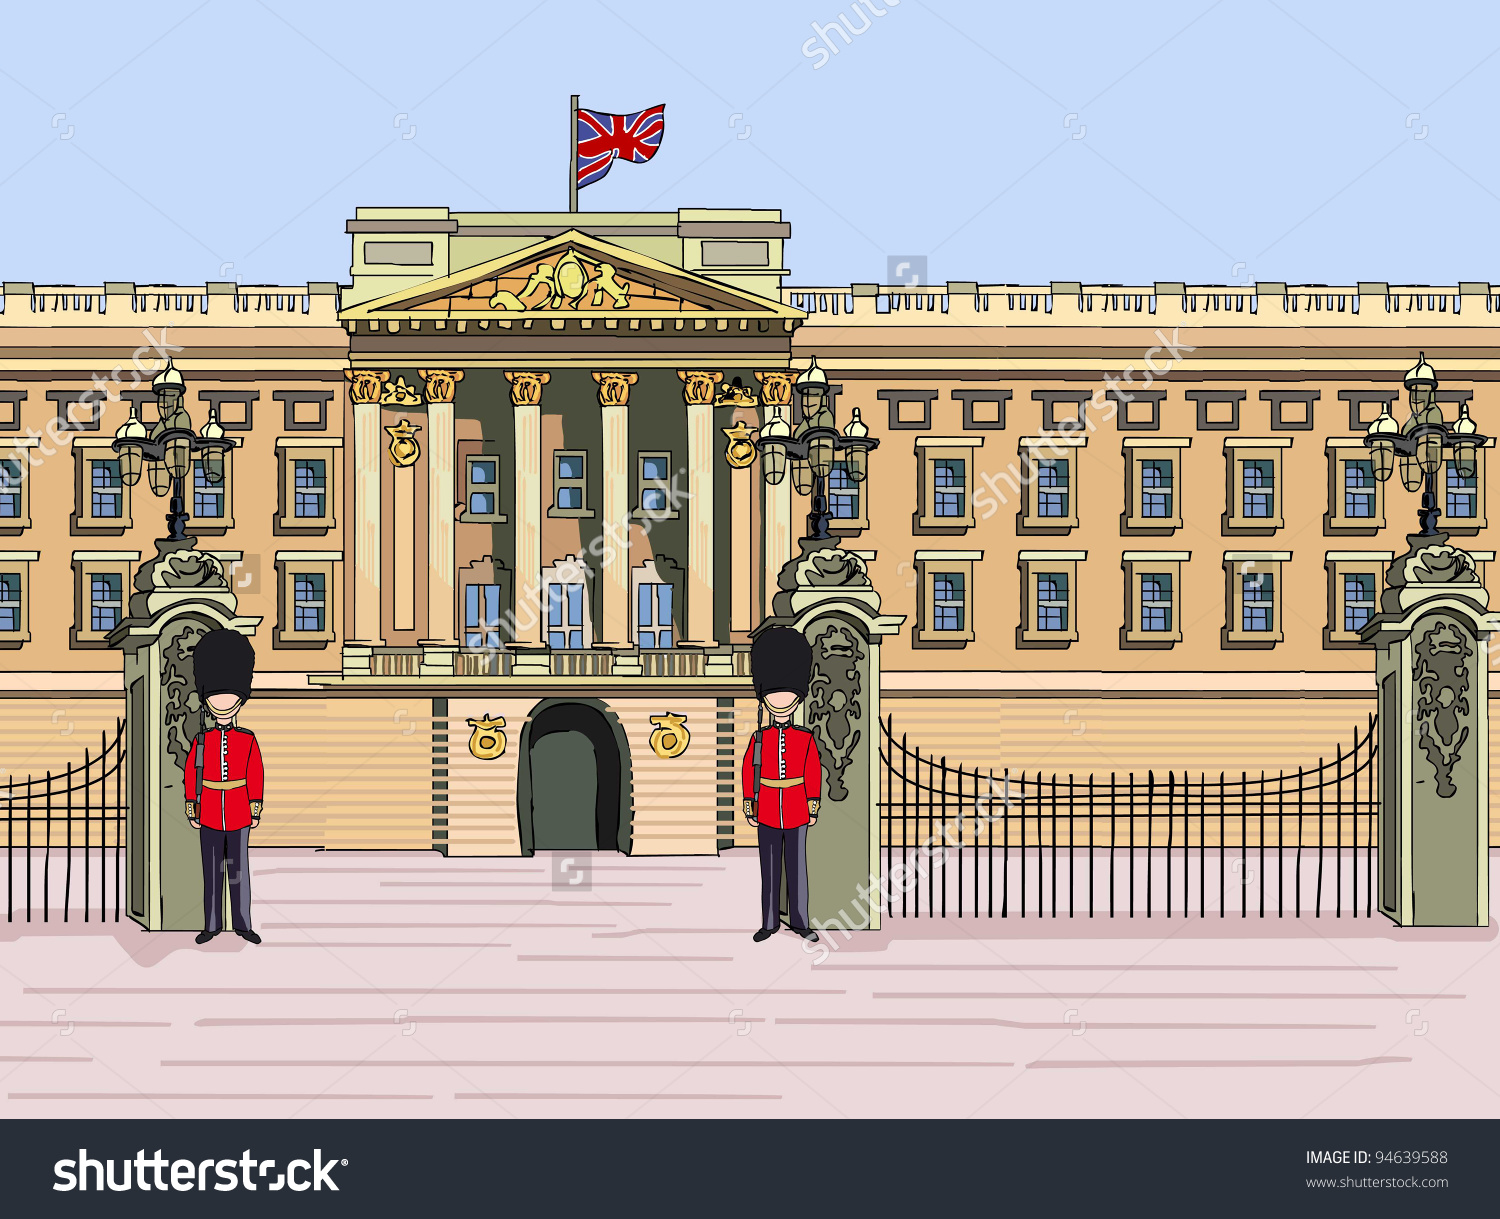 Buckingham palace clipart 20 free Cliparts | Download images on